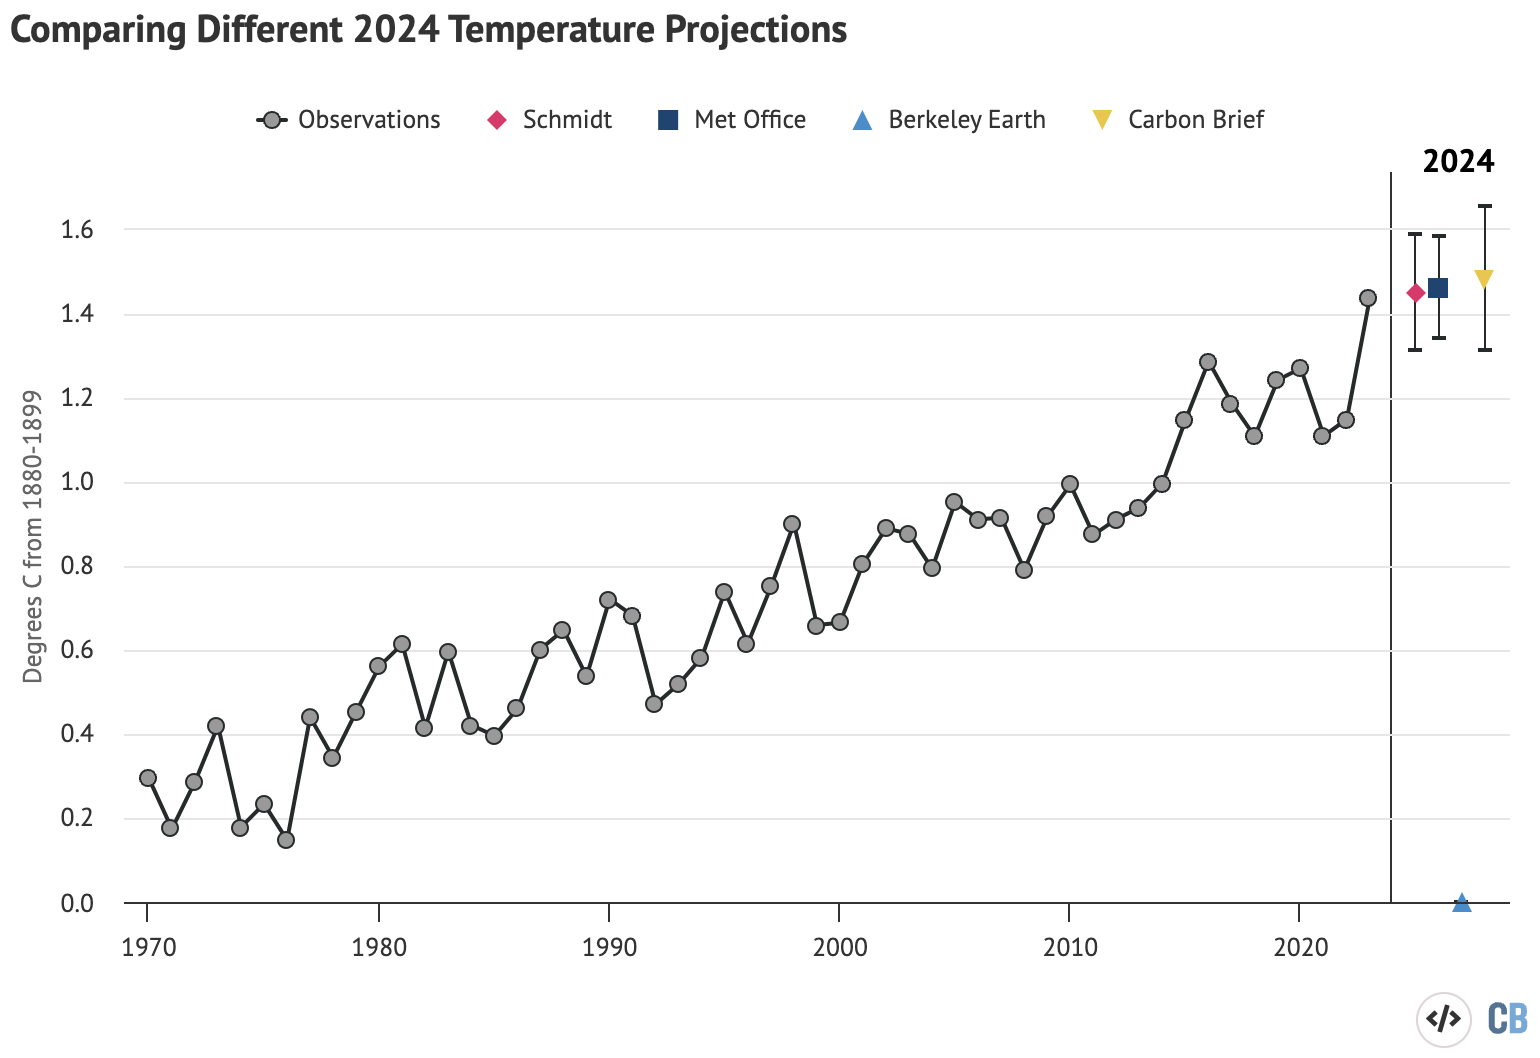 Temperature projections for 2024 from the UK Met Office, NASA’s Dr Gavin Schmidt, Berkeley Earth, and Carbon Brief, relative to pre-industrial (1880-99) temperatures and compared to the historical average of six different datasets produced by the WMO. Chart by Carbon Brief.